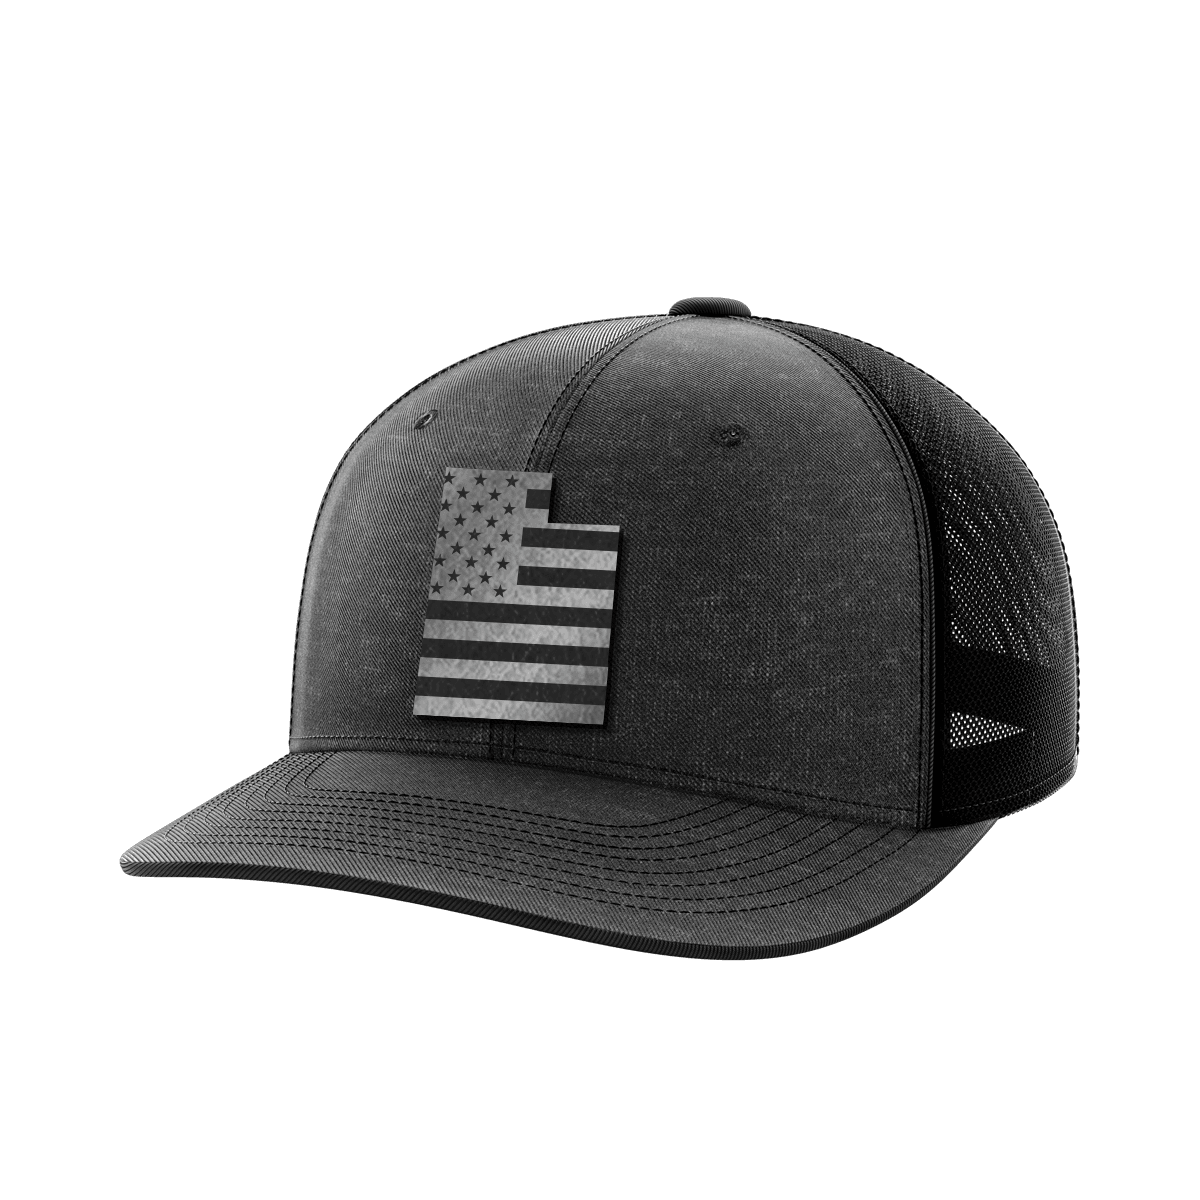 Utah United Collection (black leather) - Greater Half